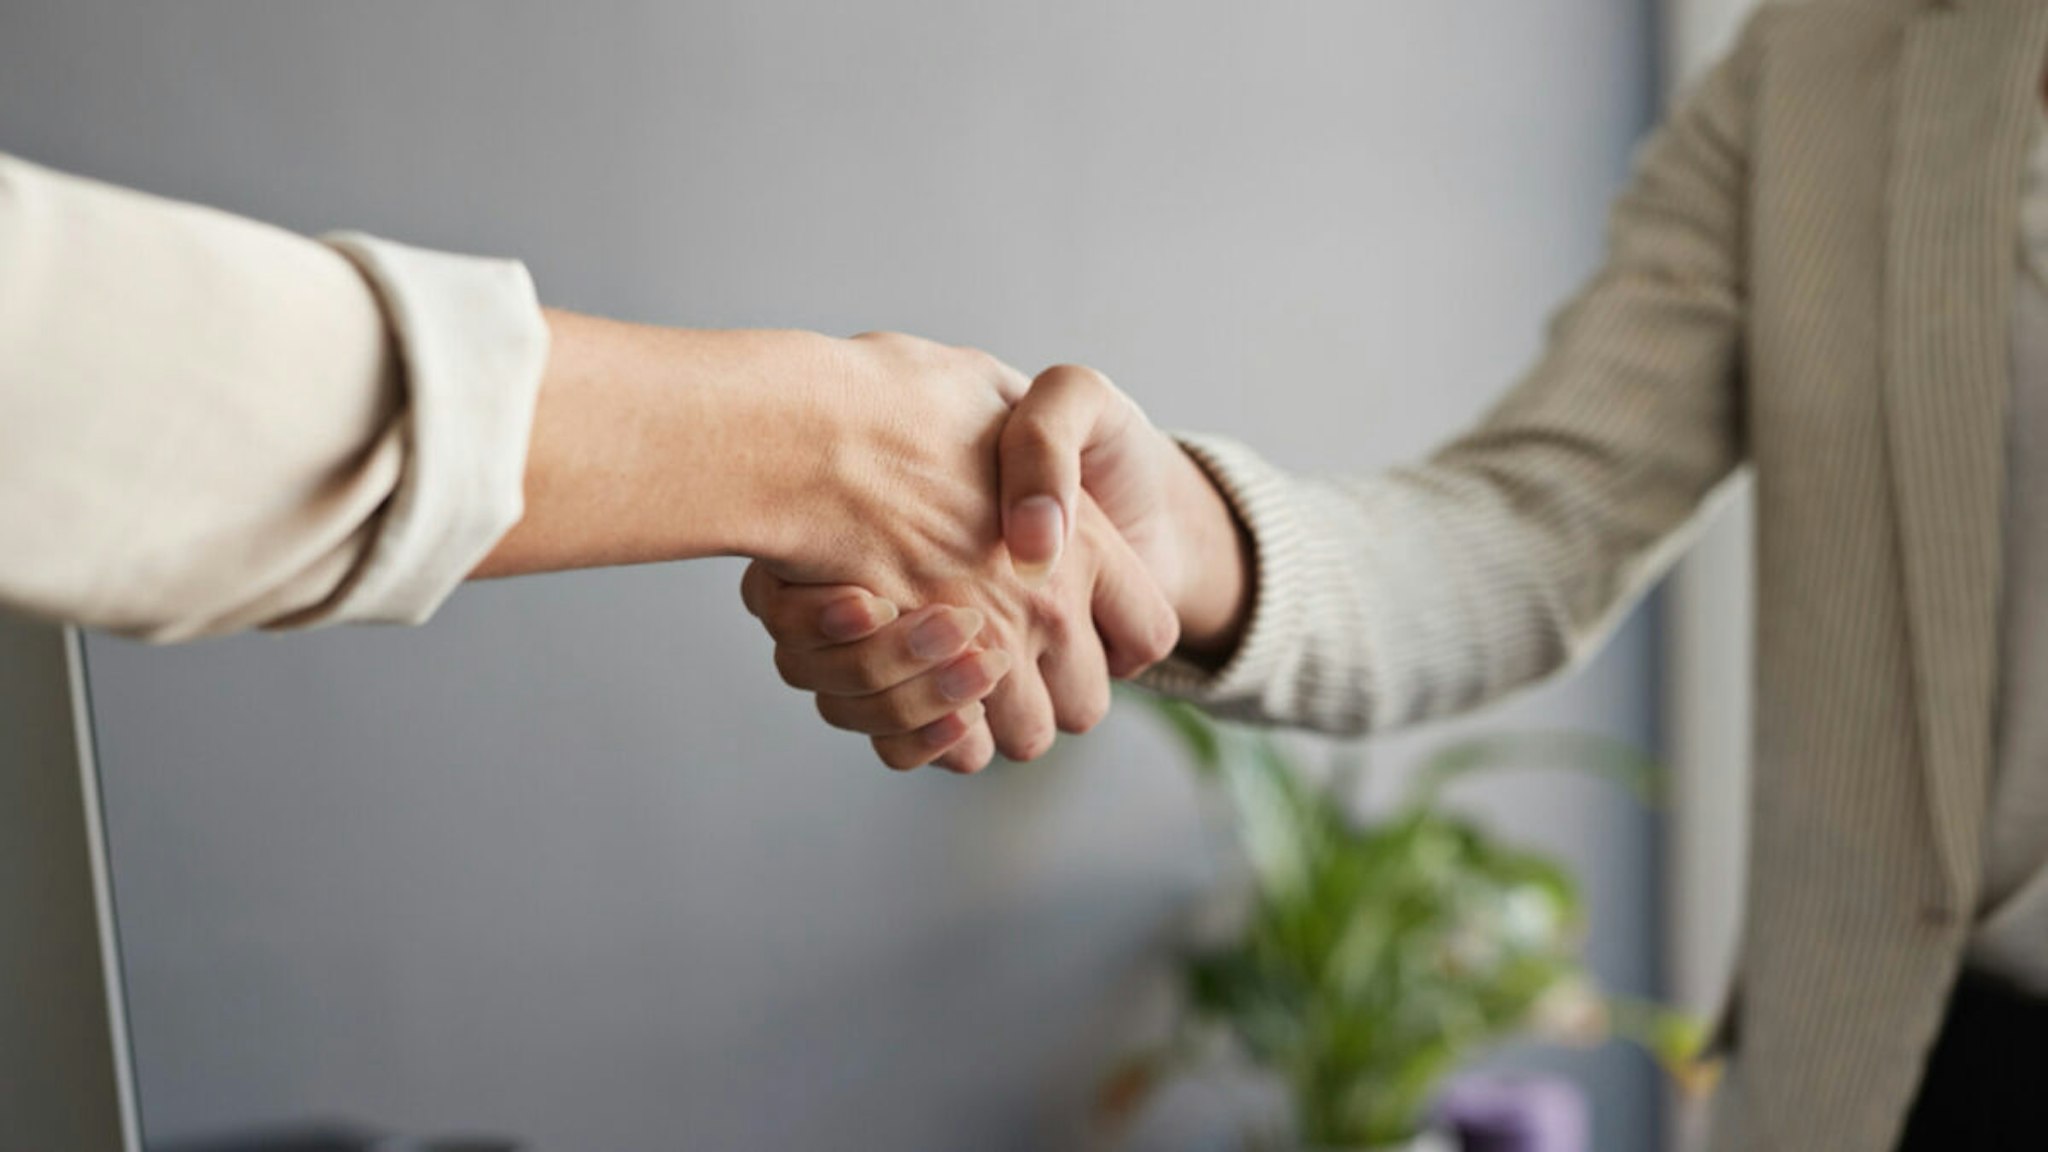 Midsection of female entrepreneur shaking hands with coworker at workplace.